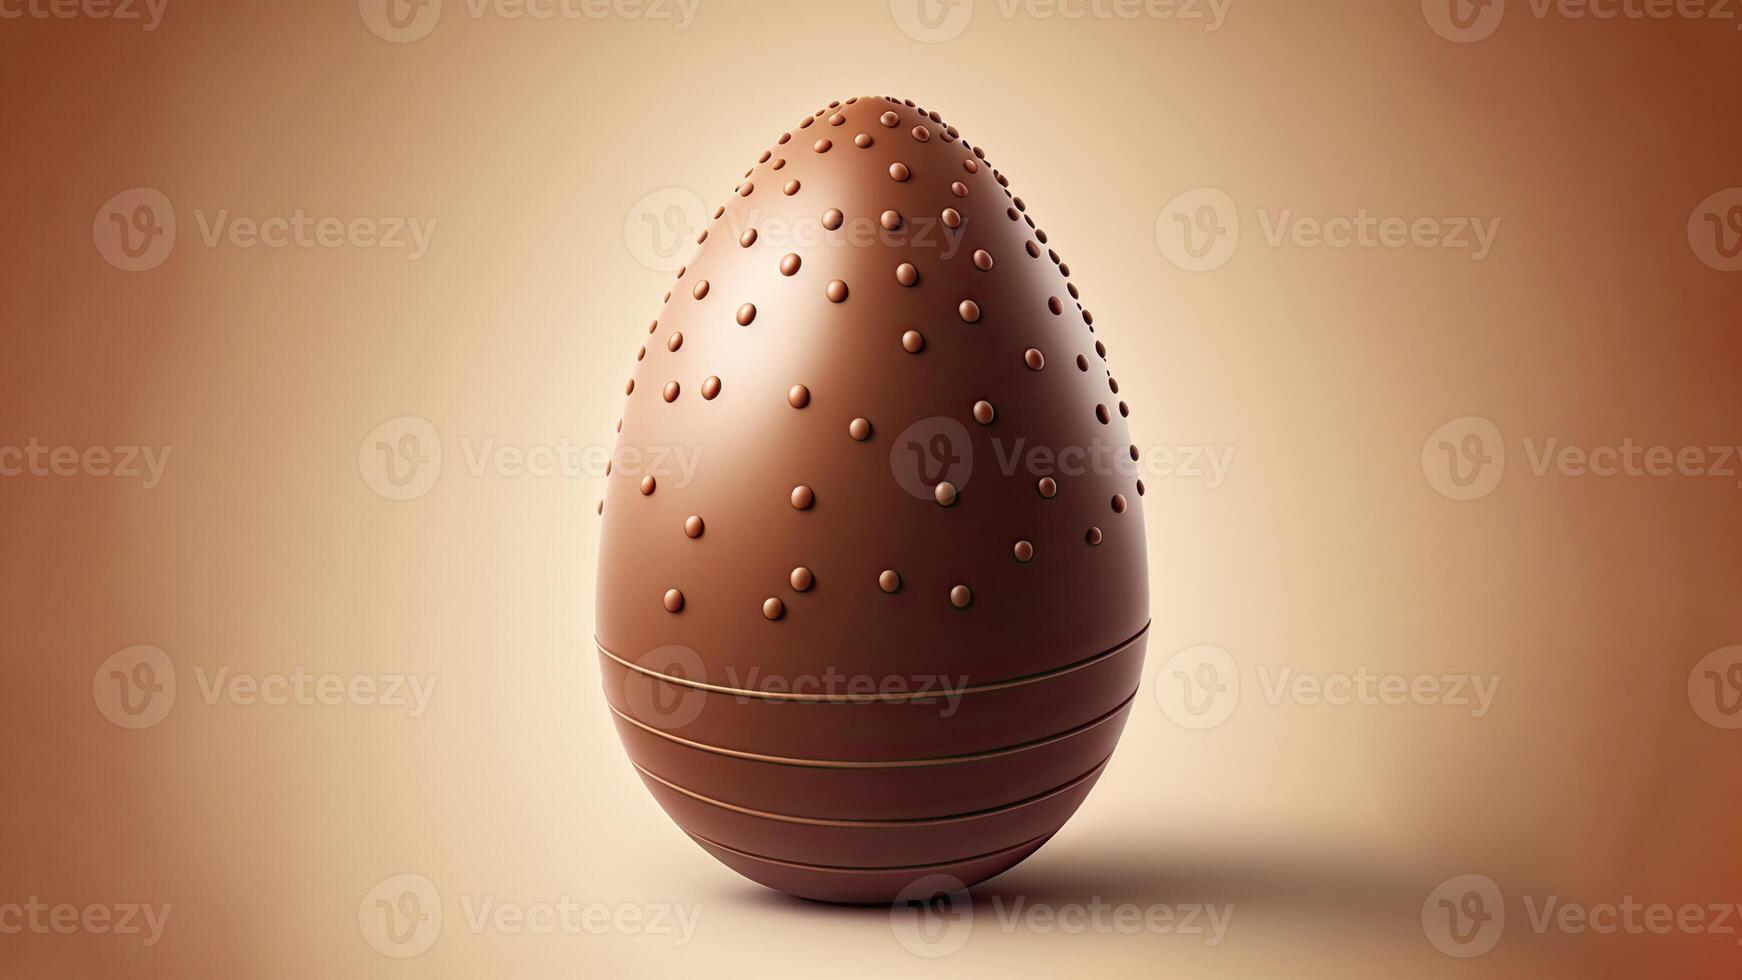 3D Render of Chocolate Dotted Egg Against Pastel Brown Background And Copy Space. Happy Easter Concept. photo